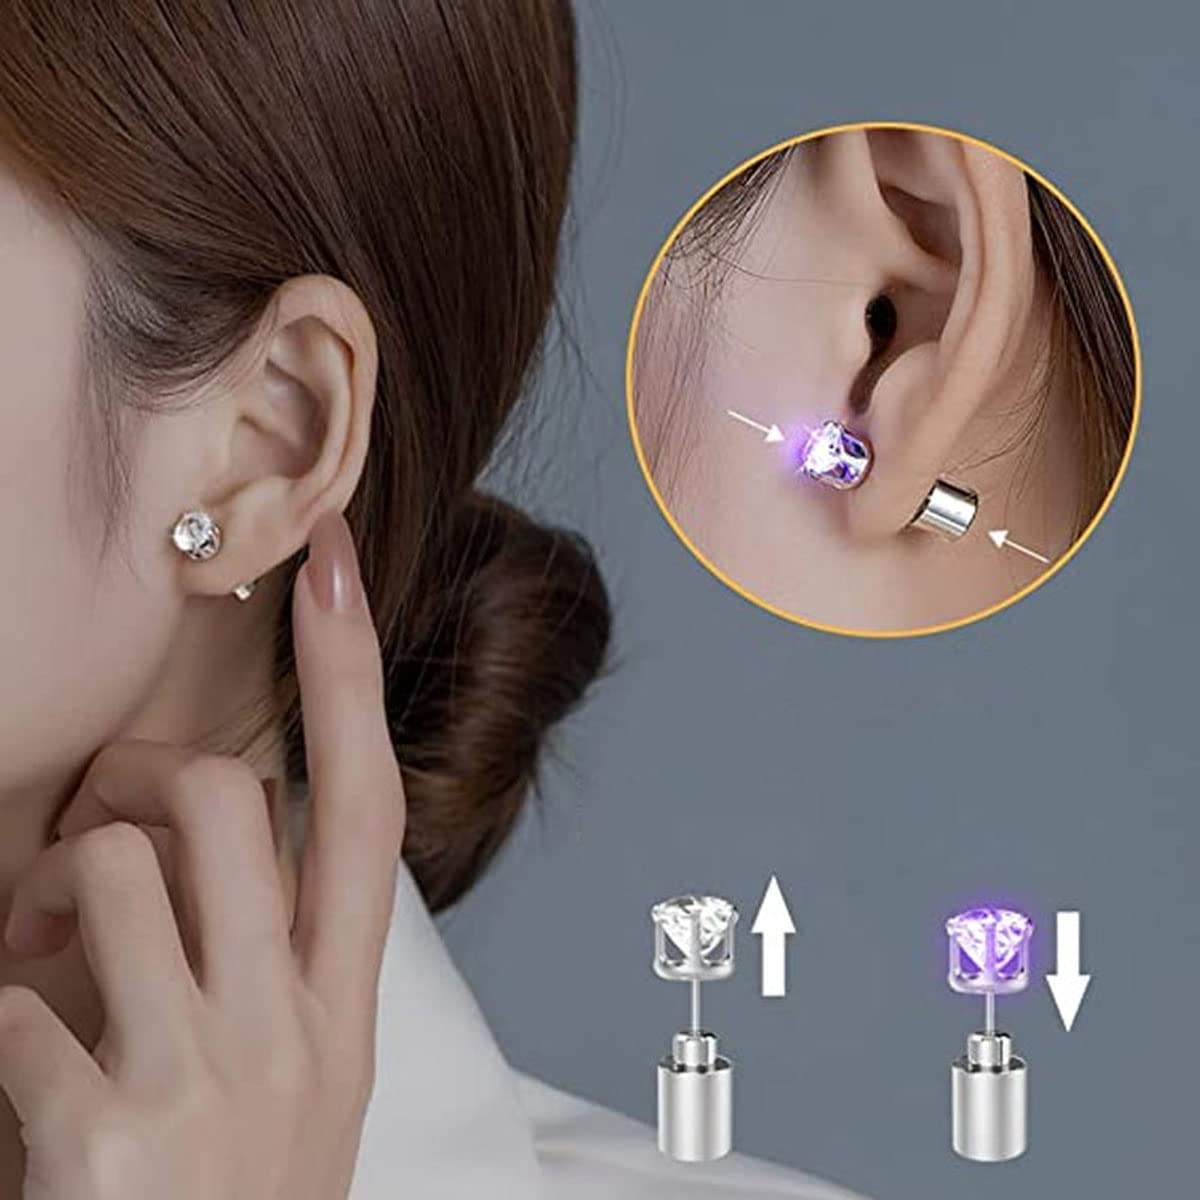 LED color-changing light-emitting earrings prom accessories jewelry-BUNNYKACHU